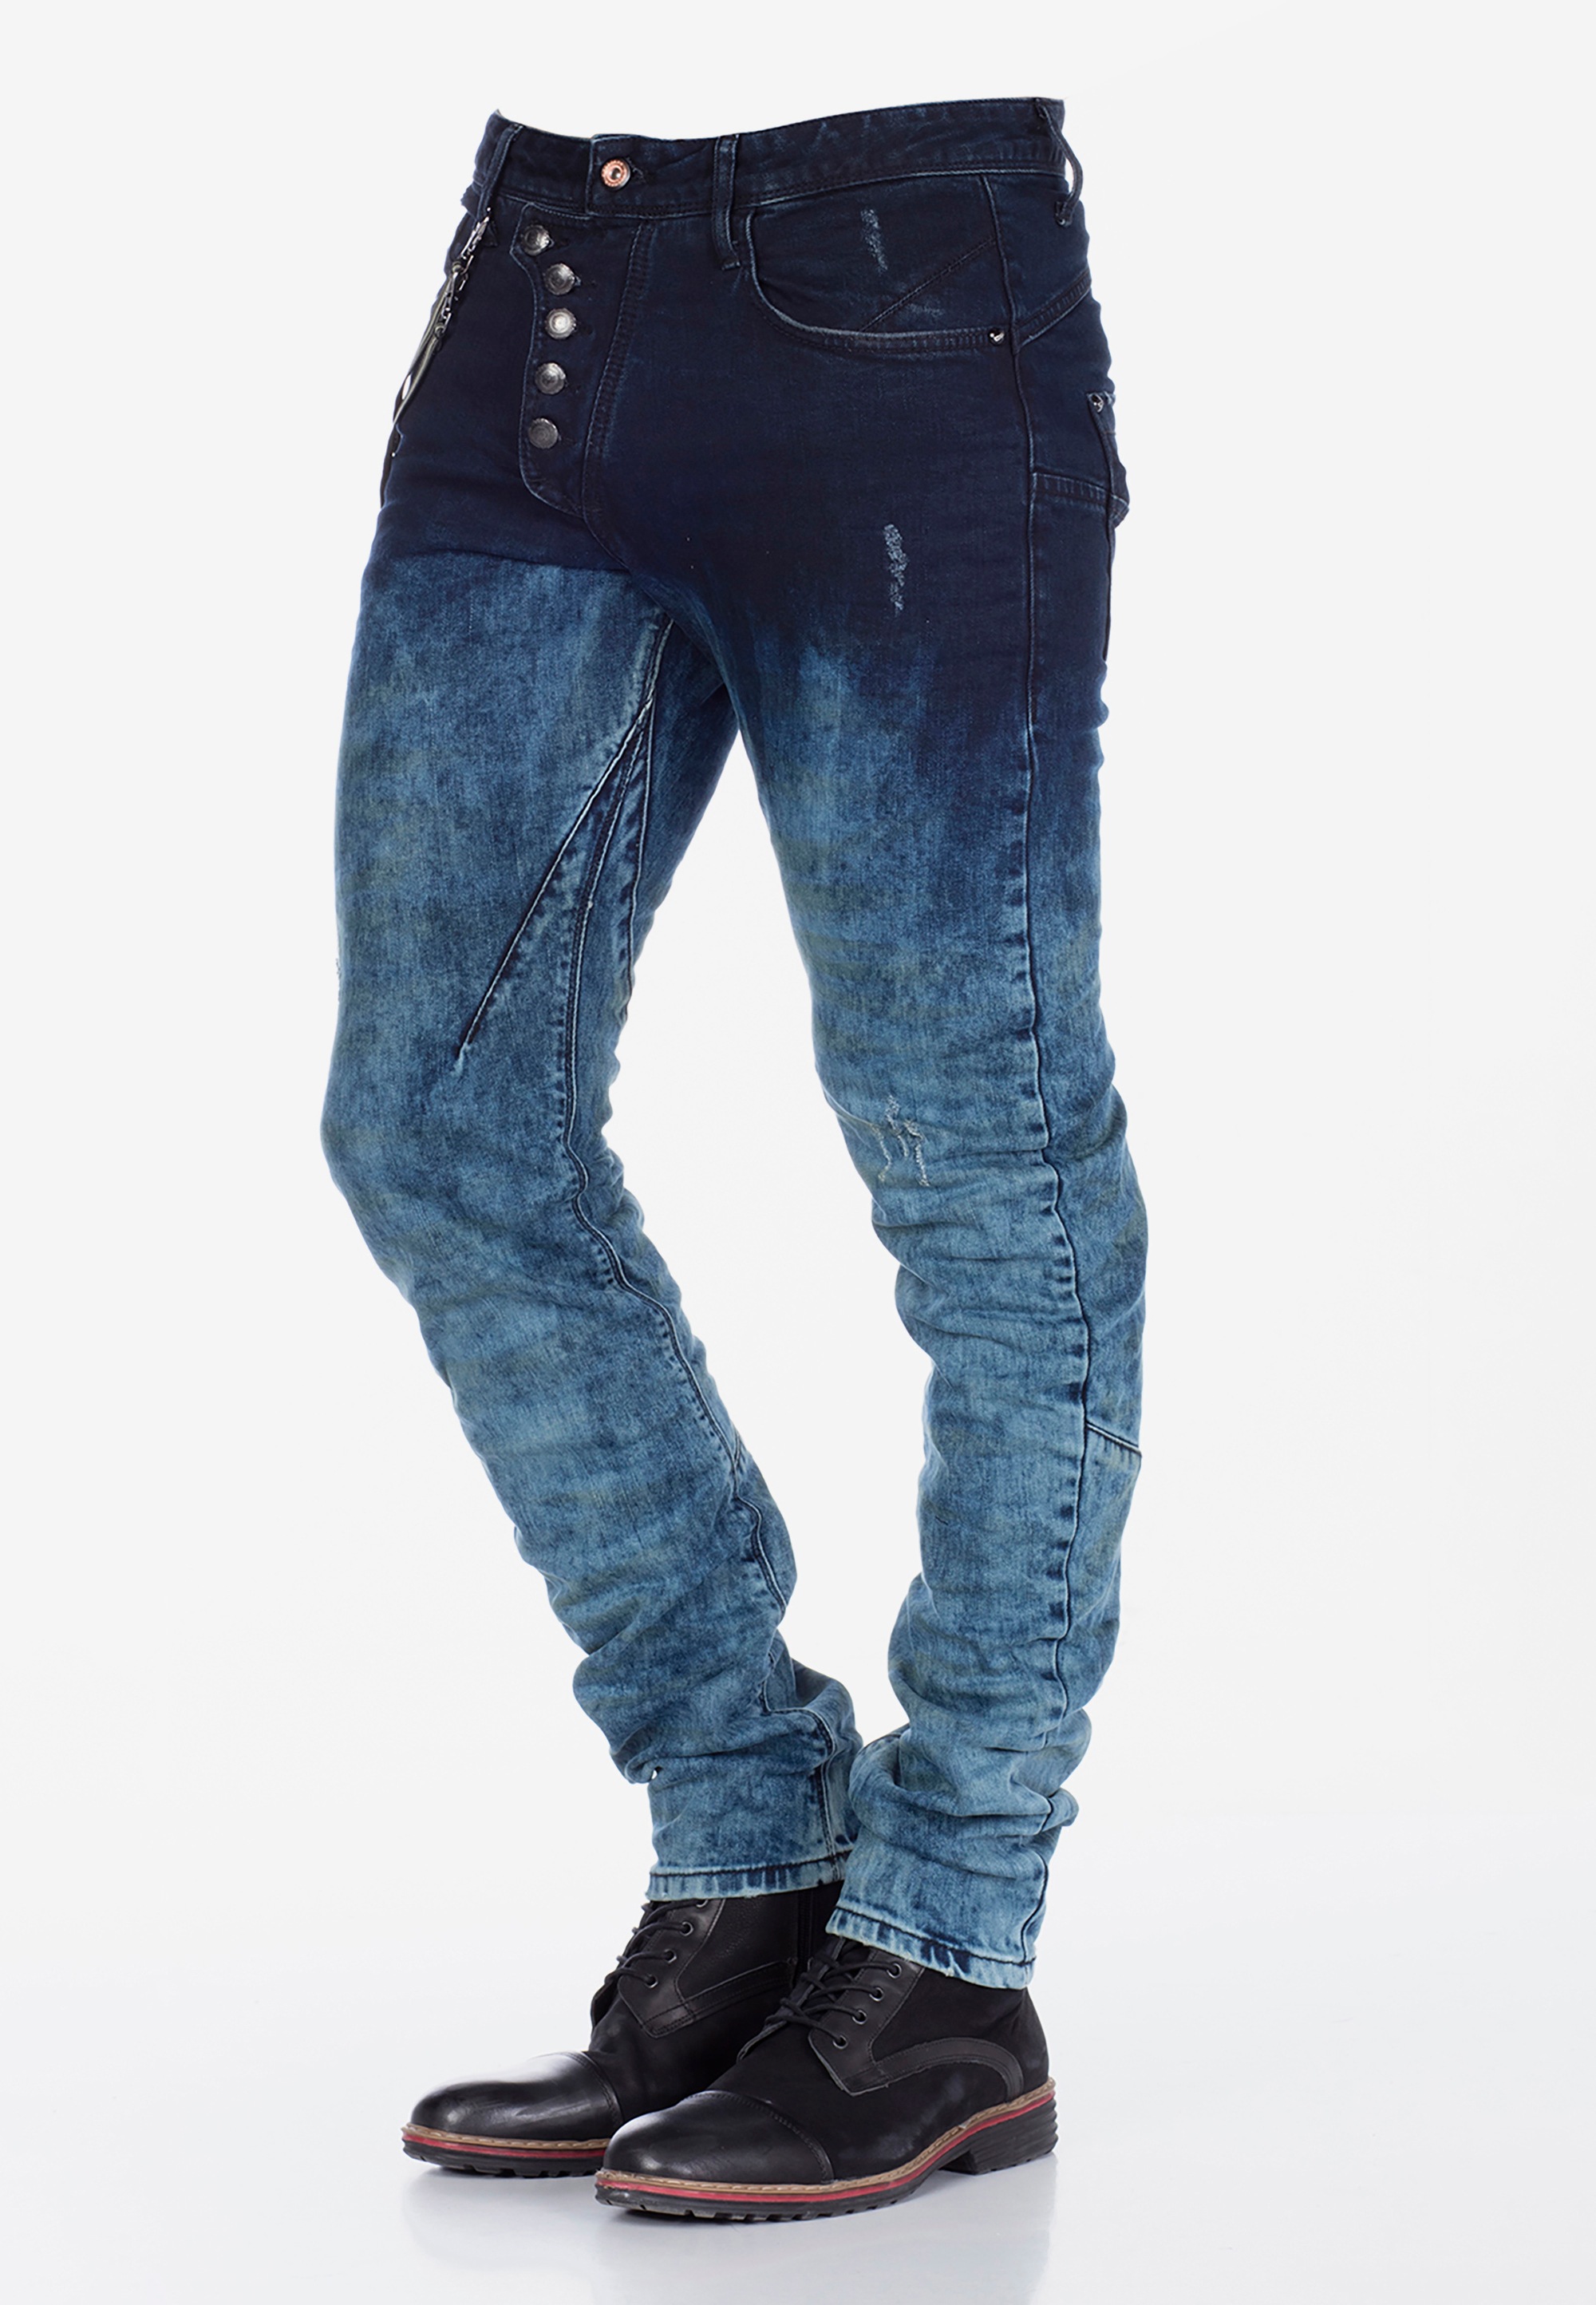 Cipo & Baxx Bequeme Jeans, im modernen Look in Straight Fit